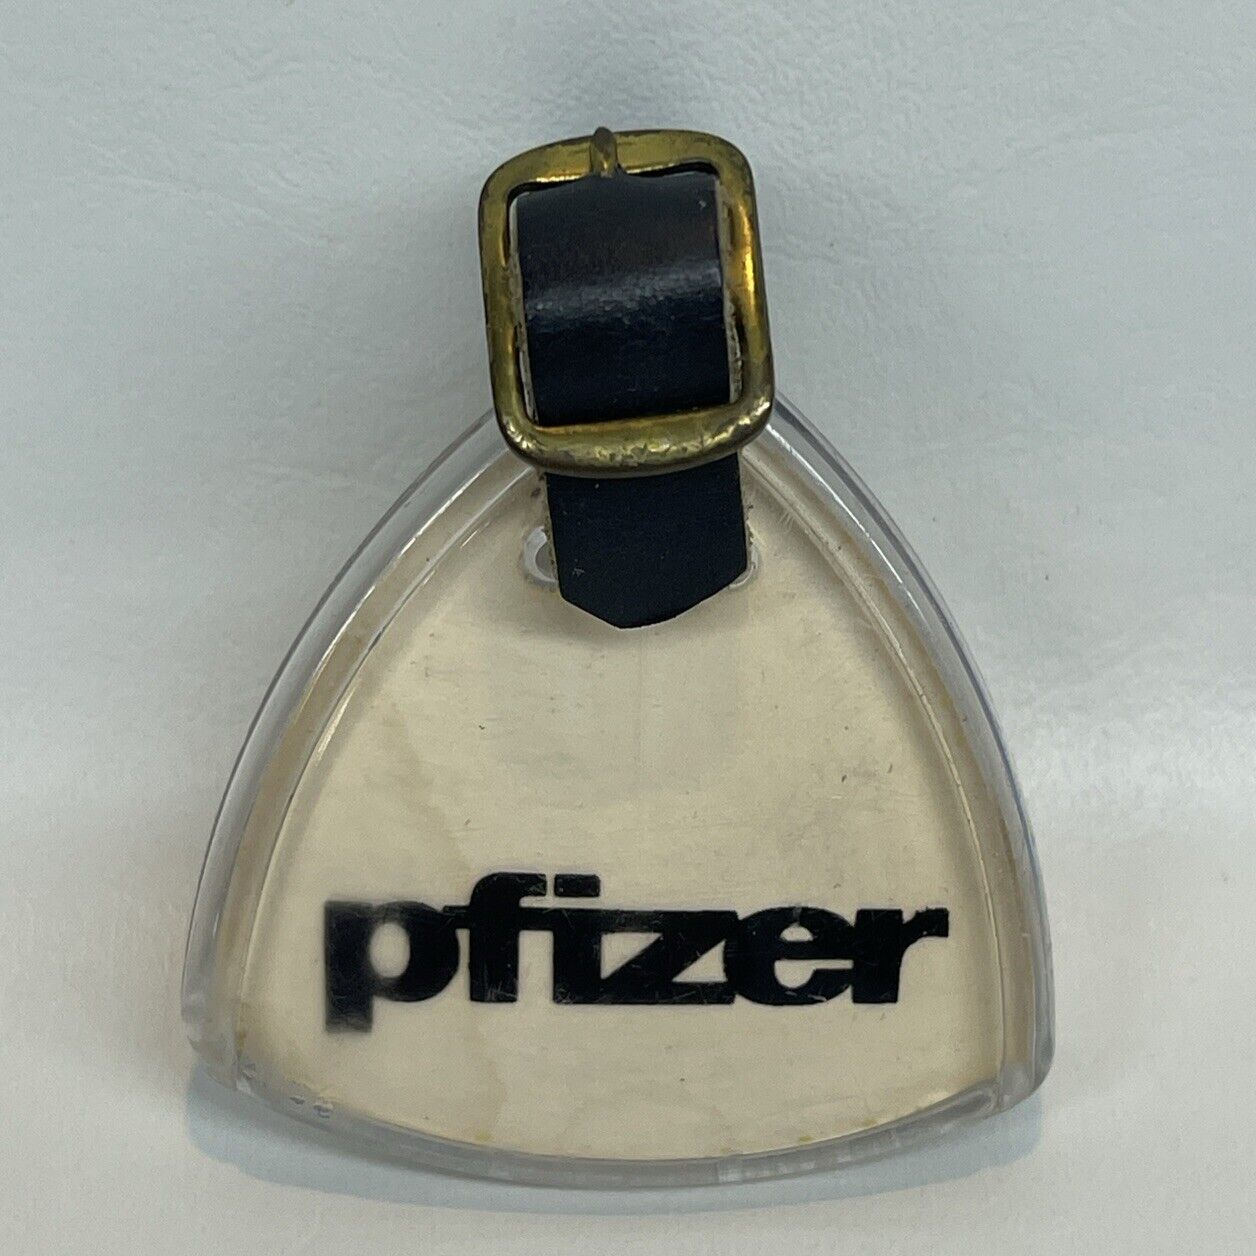 Pfizer Vintage Drug Rep Luggage Tag Clear Pre-Owned FLAWS